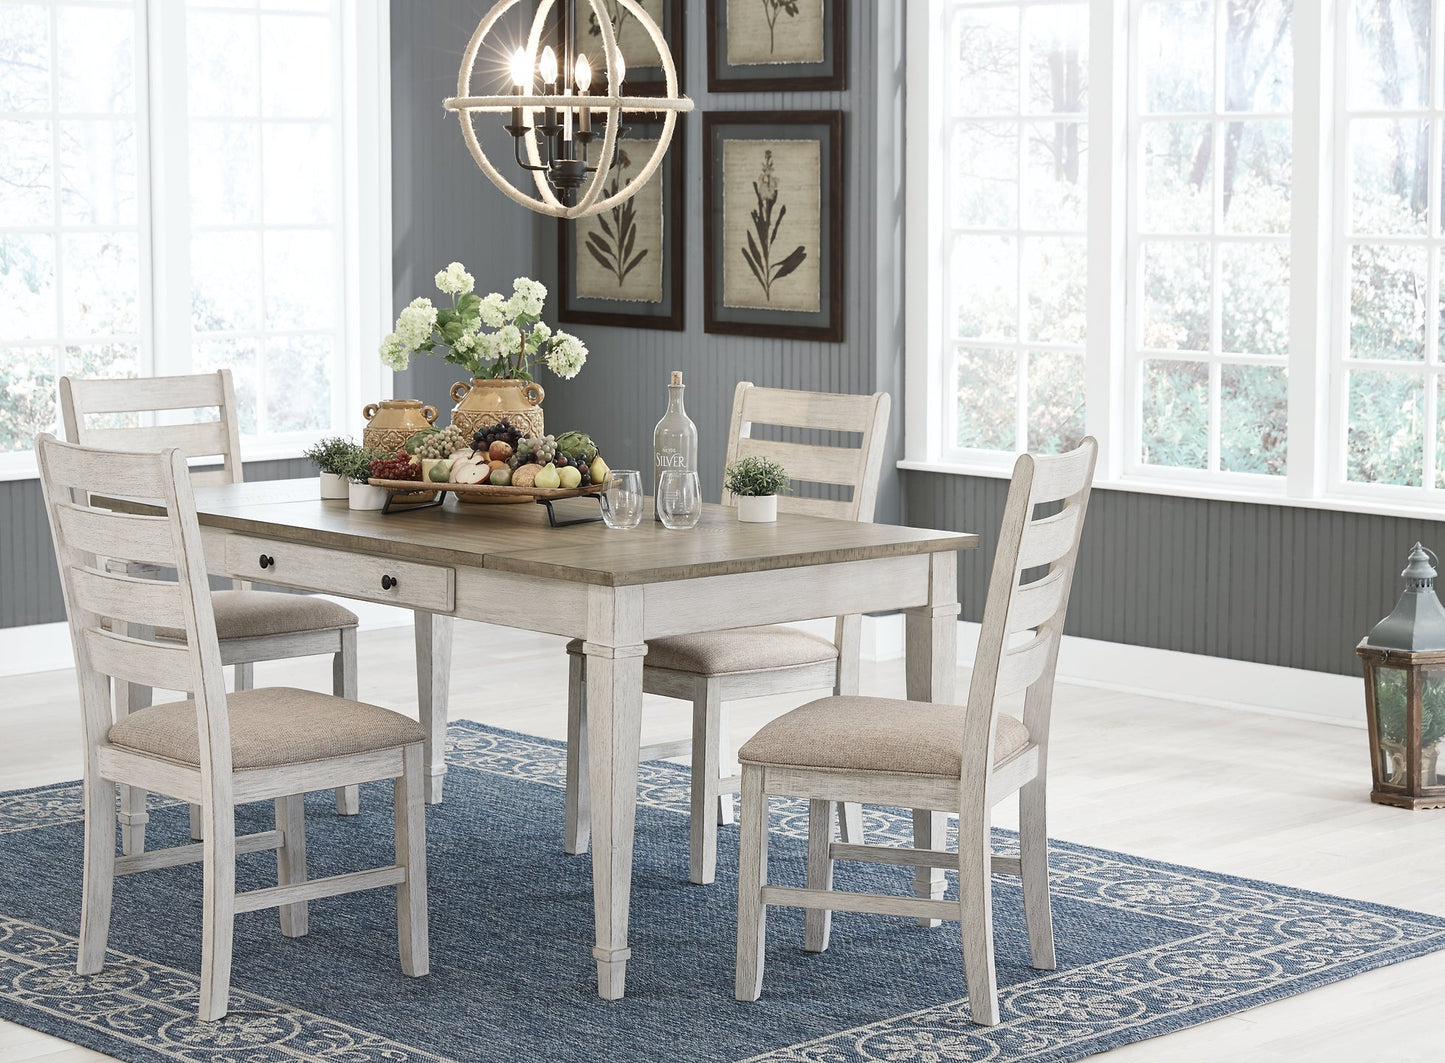 Skempton Dining Table and 4 Chairs at Walker Mattress and Furniture Locations in Cedar Park and Belton TX.